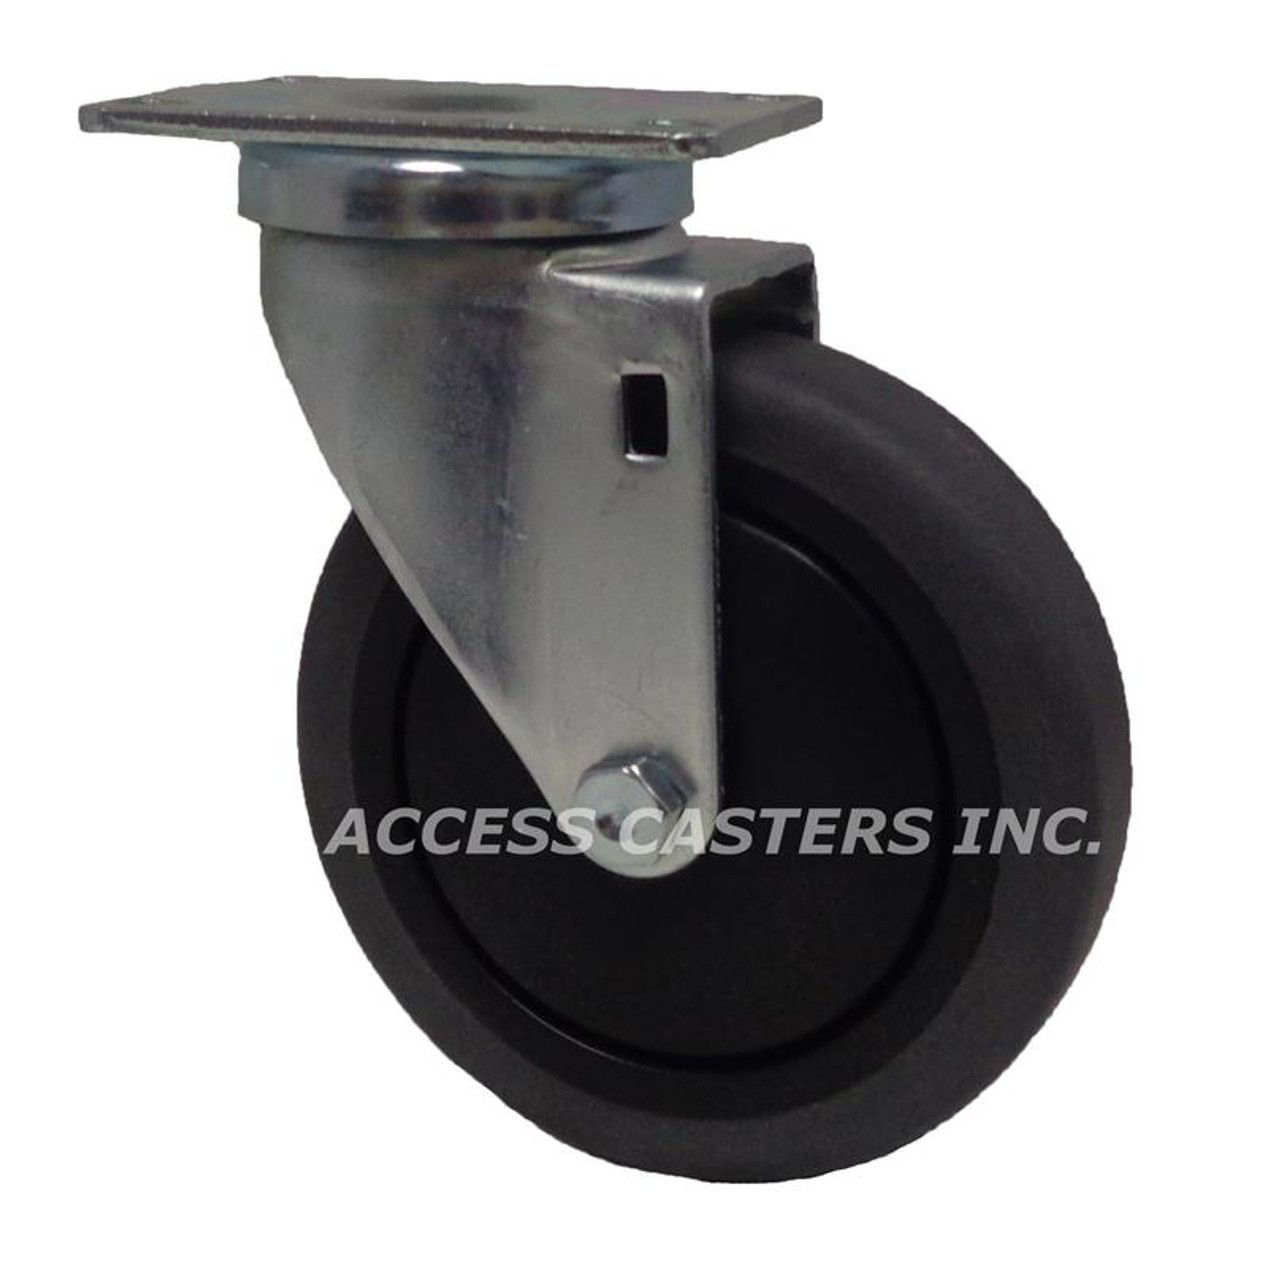 21CN50S 5" Anti-Static Swivel Caster with Top Plate